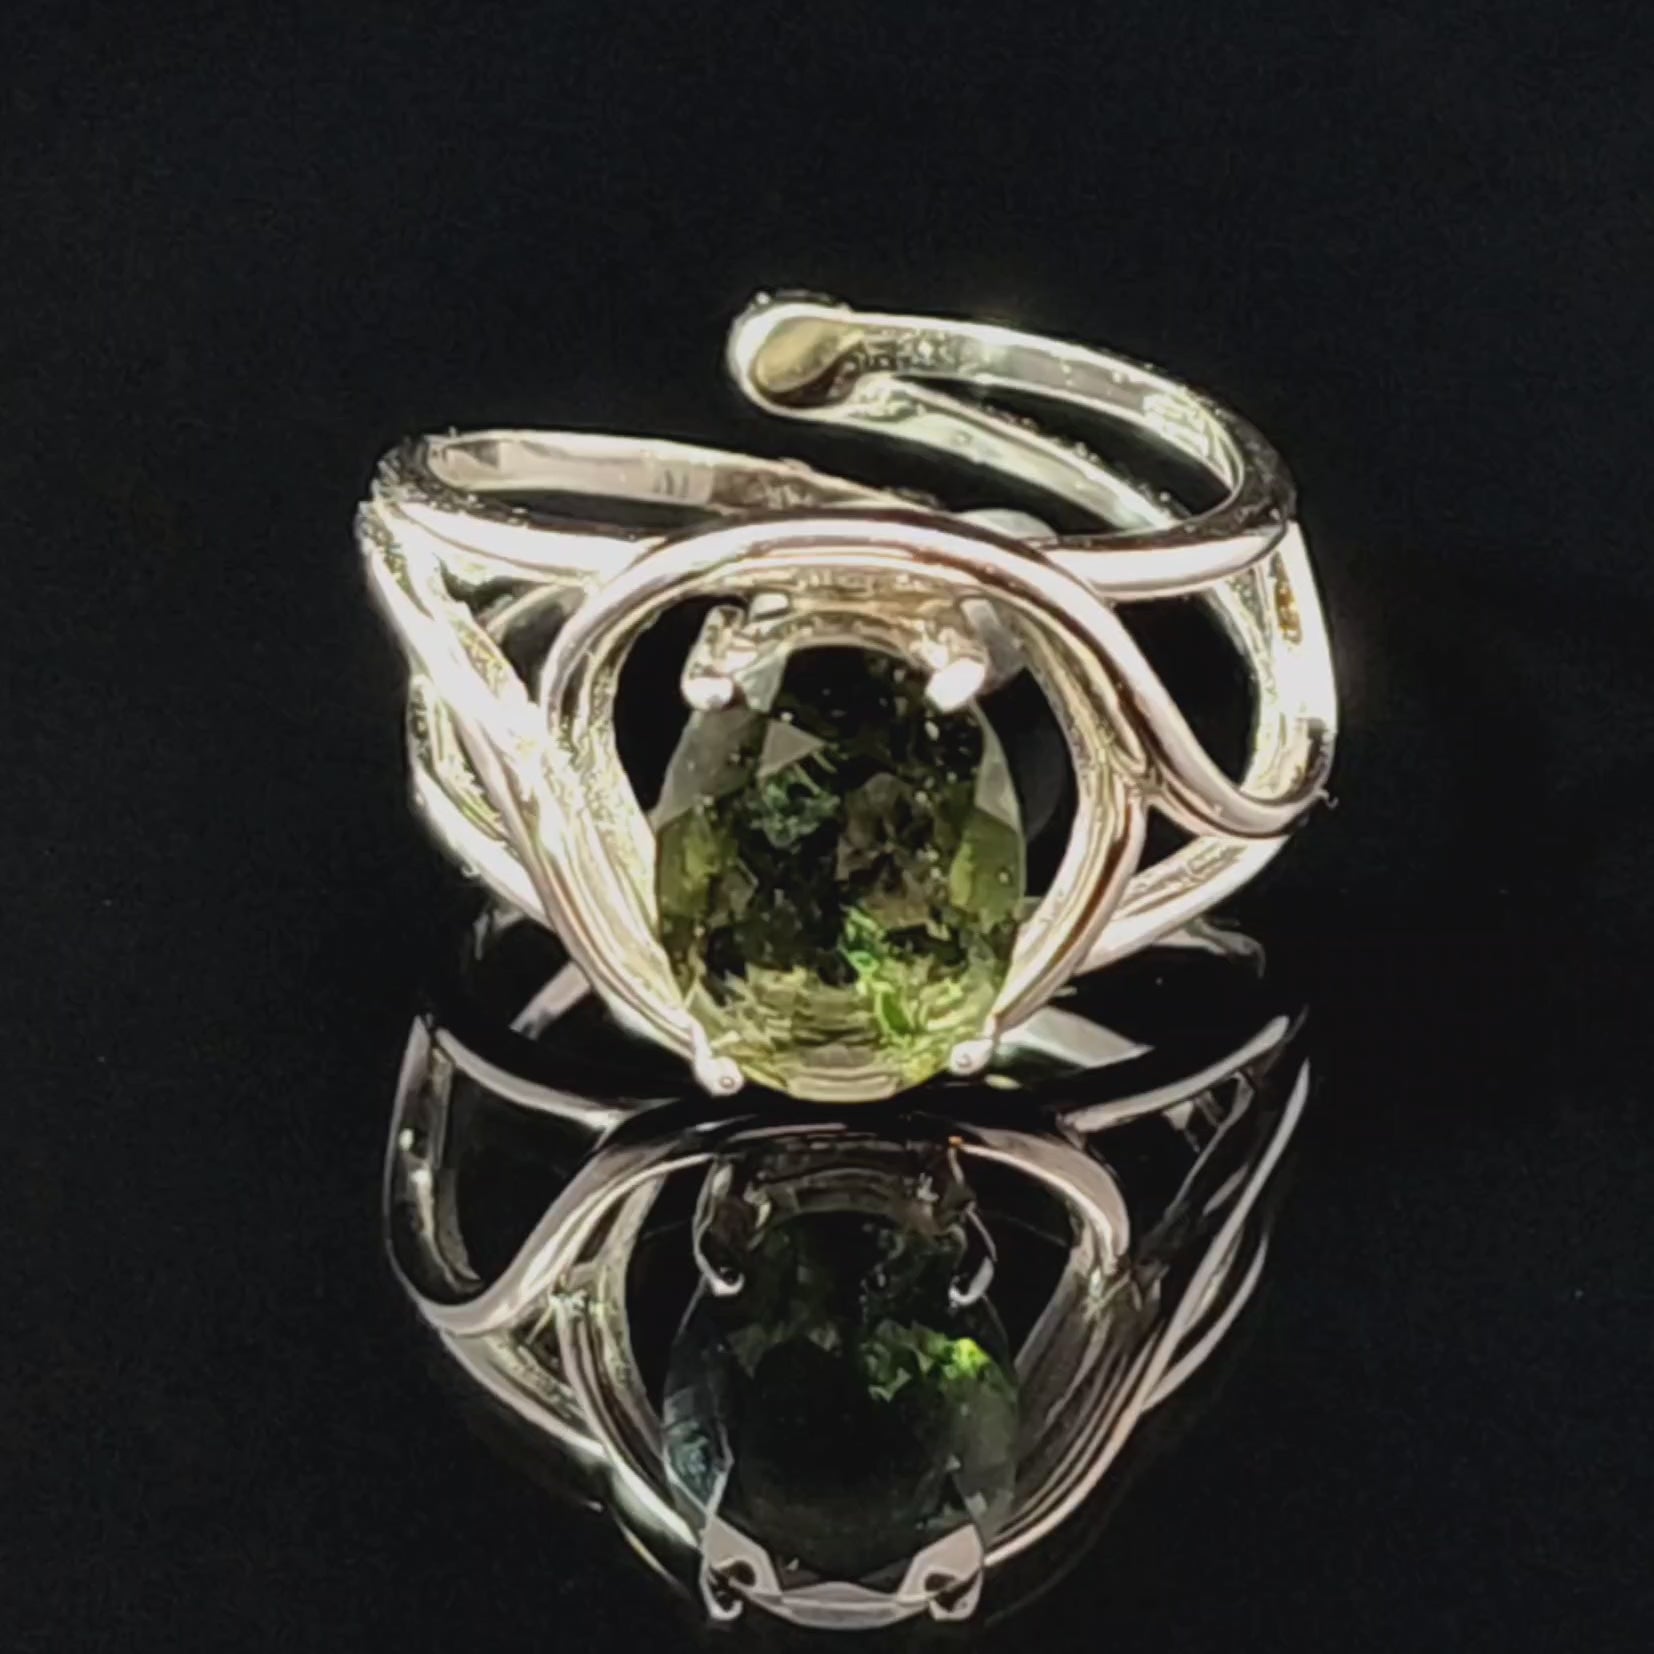 Moldavite Finger Cuff Adjustable Ring .925 Silver for Creating your Dream Life